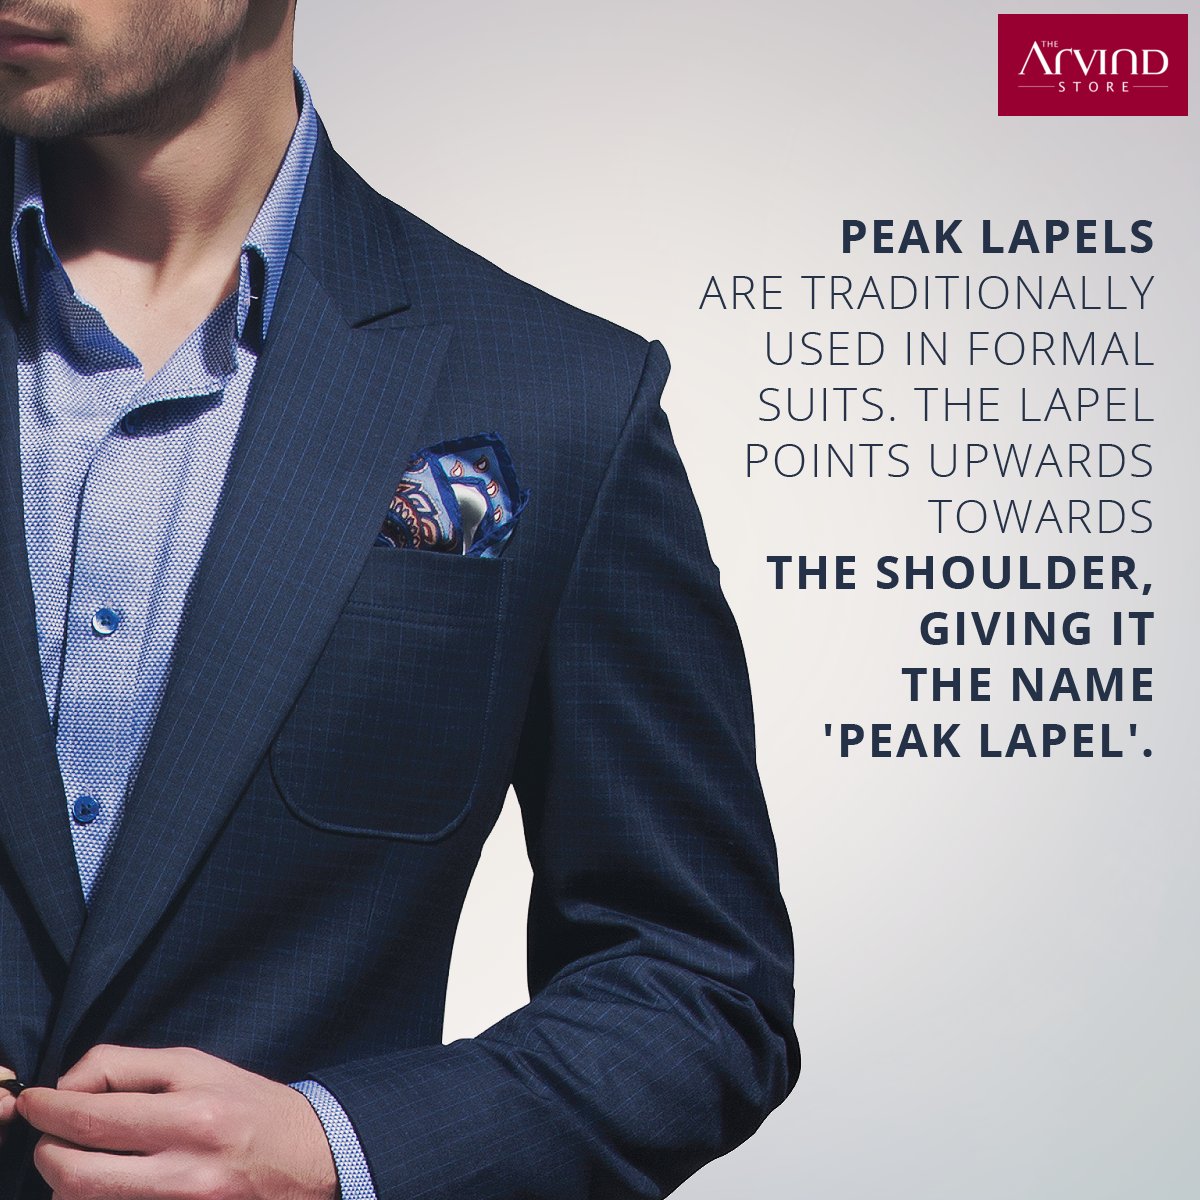 If you’re attending a wedding or a black tie event, then make a statement by wearing a Peak Lapel suit. #FashionTip https://t.co/zpgdctb1i7